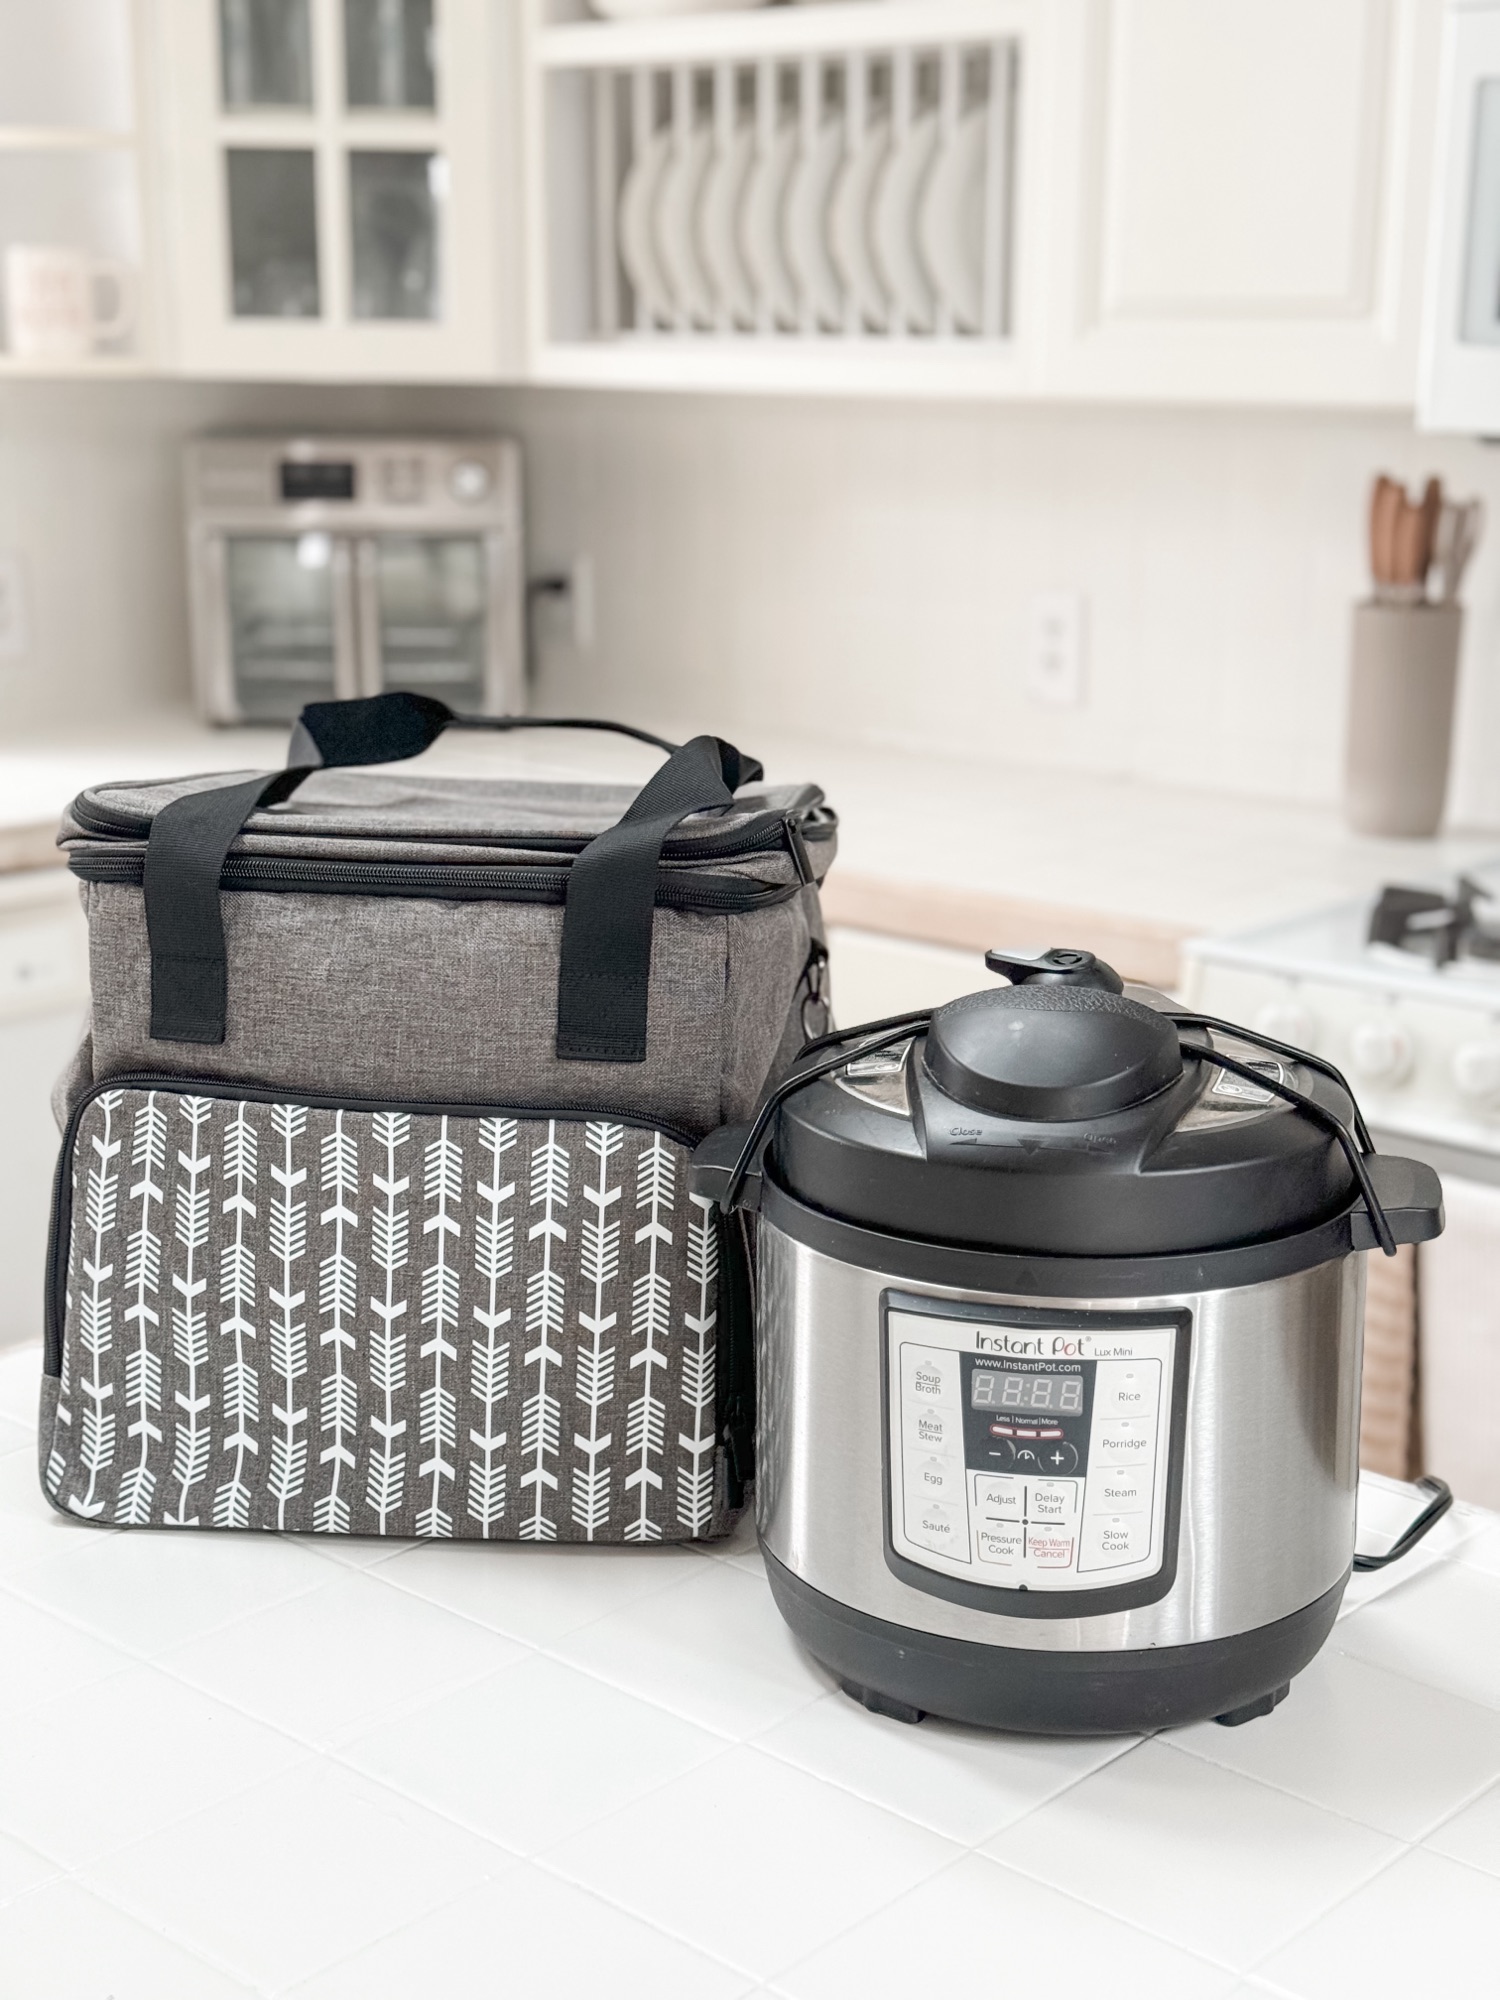 Instant Pot Accessories for Super Bowl Parties and Chili Cook Offs